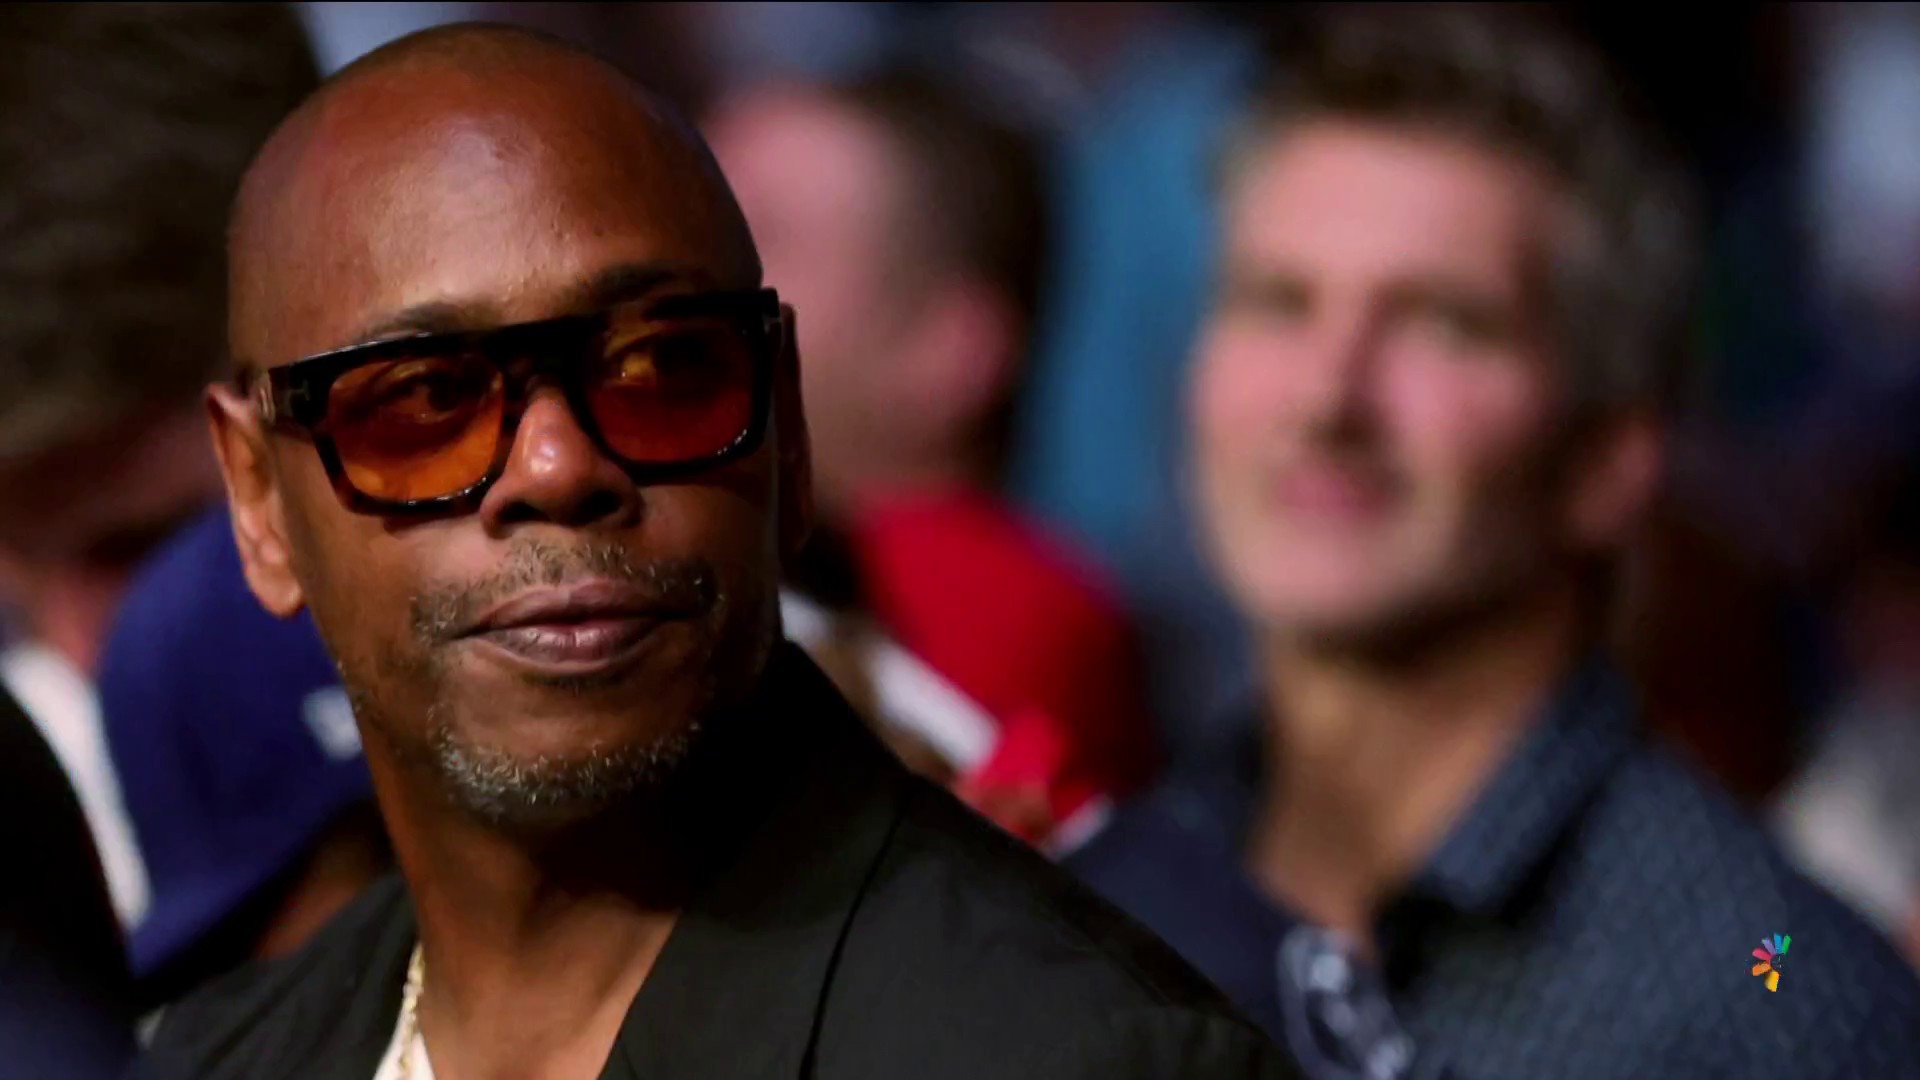 Dave Chapelle Meets With Students During Surprise Visit to High School Alma Mater in D.C.